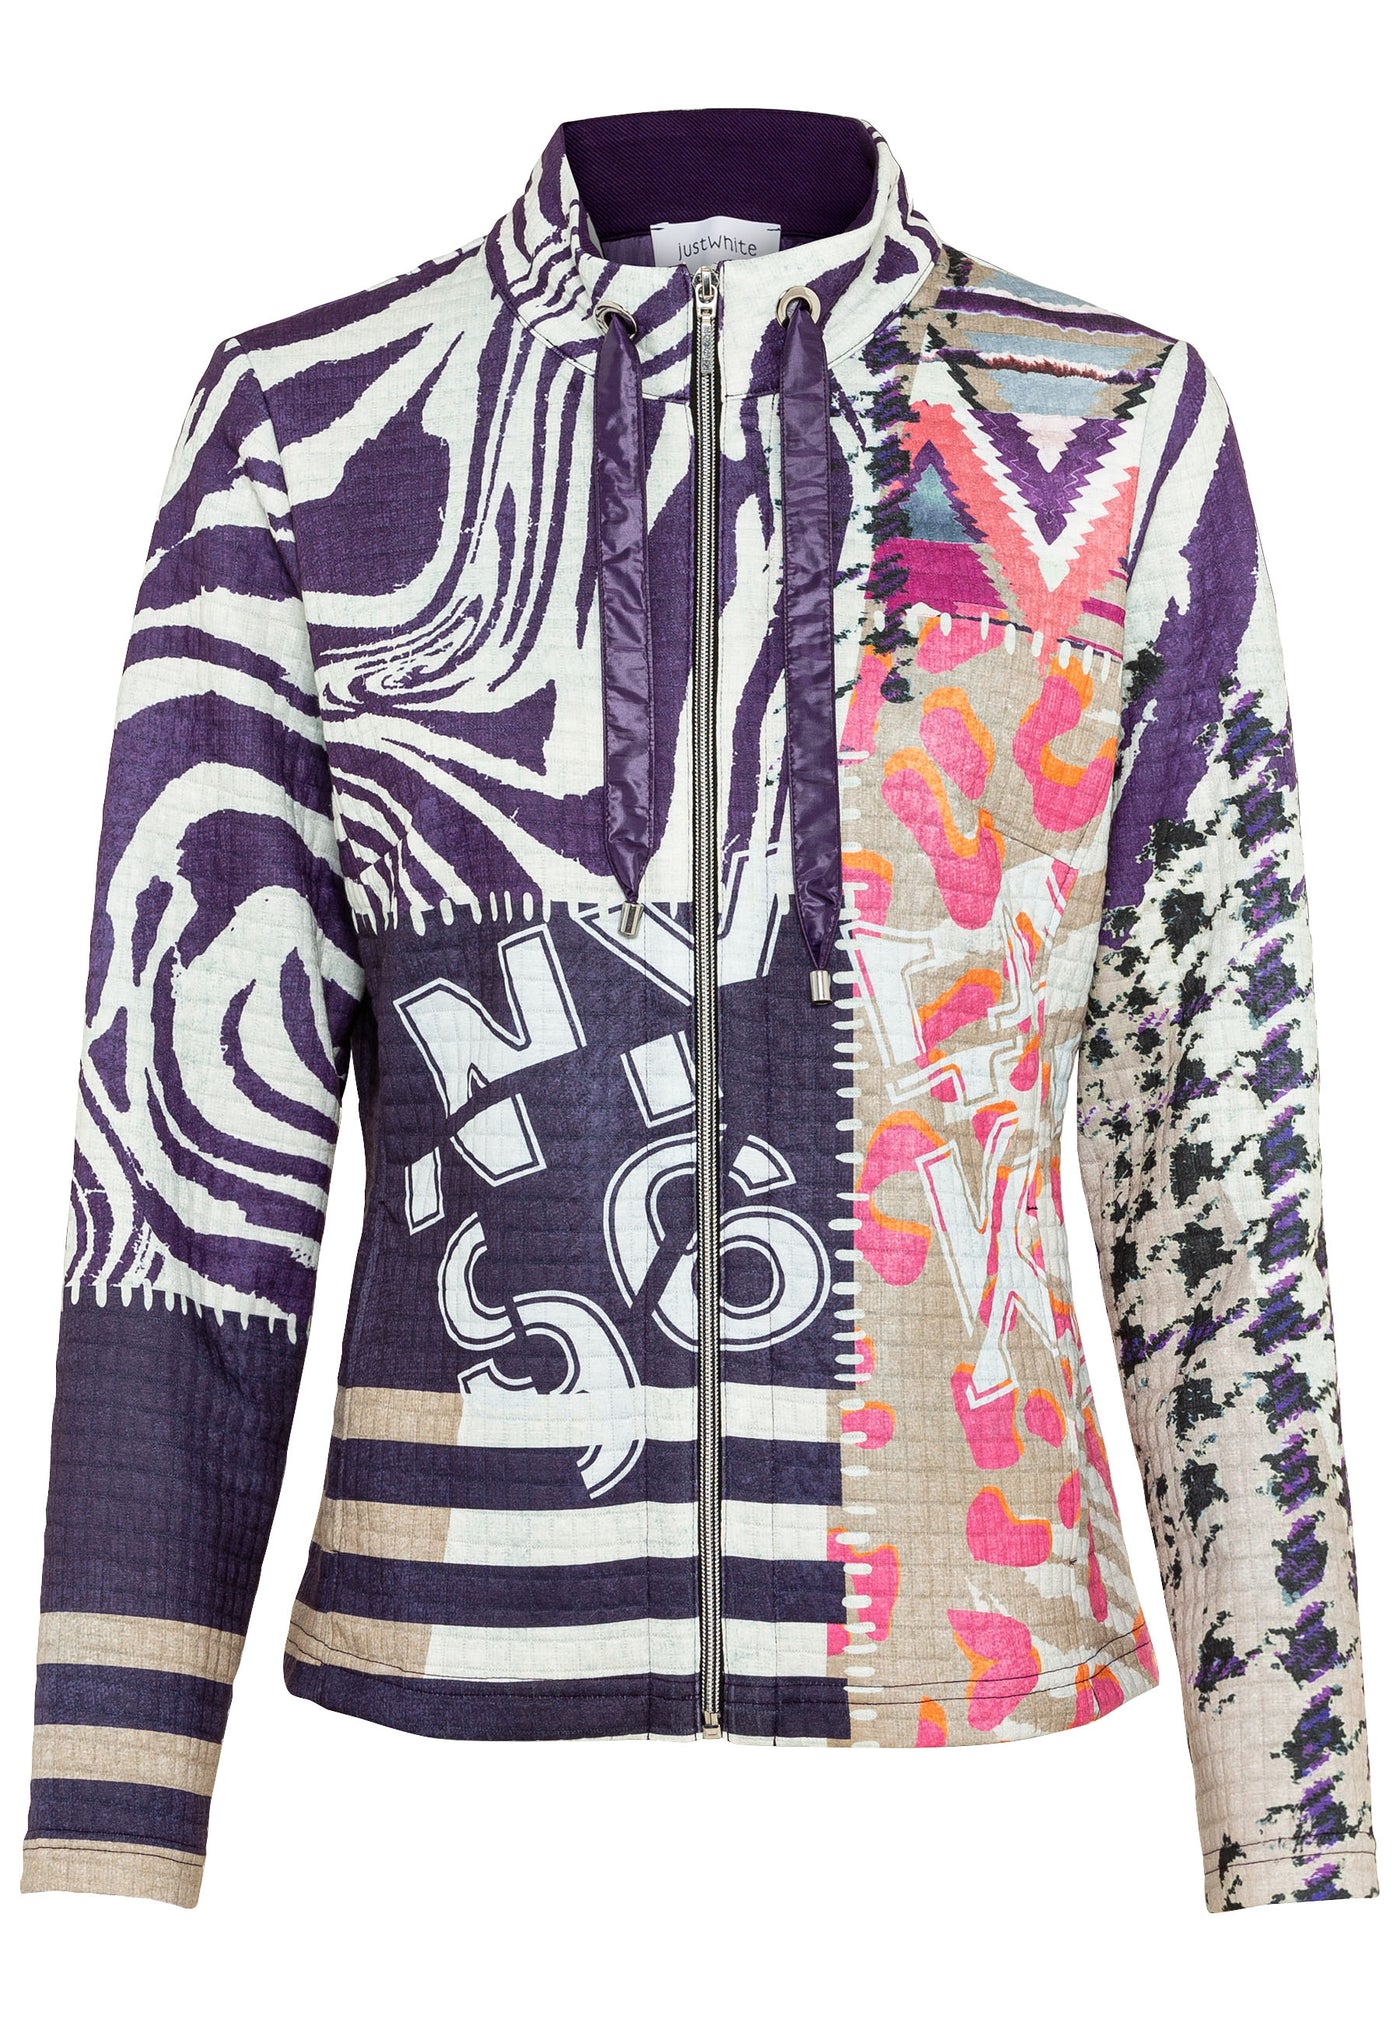 Multiprint Zip Up Jacket With Stripes and Drawstrings